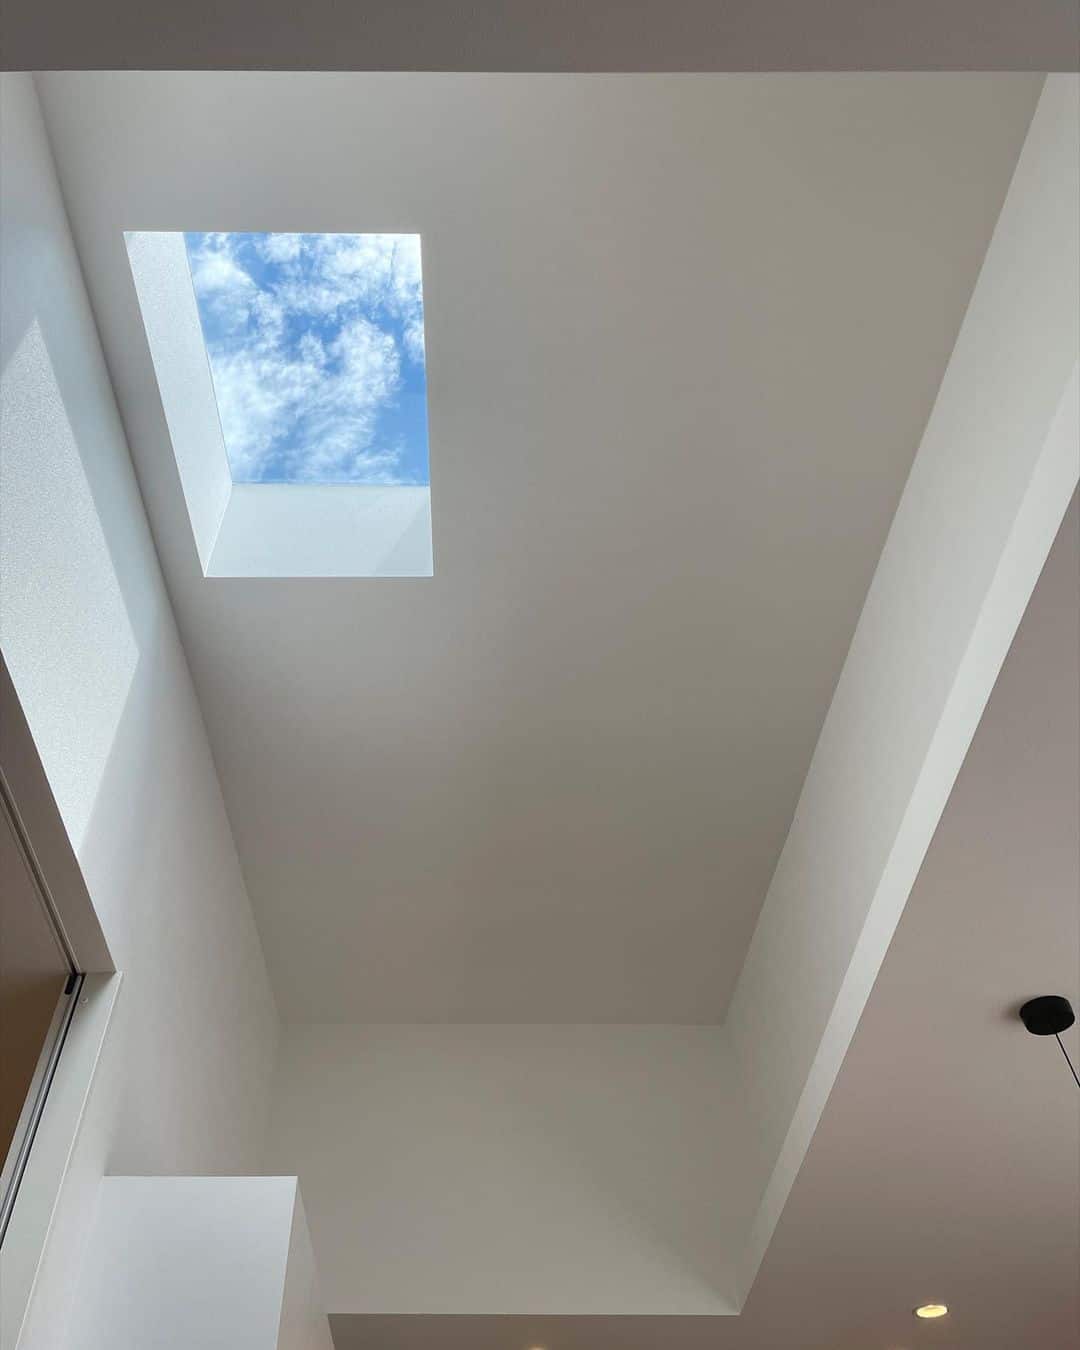 What are the Factors that can Affect the Cost of Skylight Window Repair and Replacement